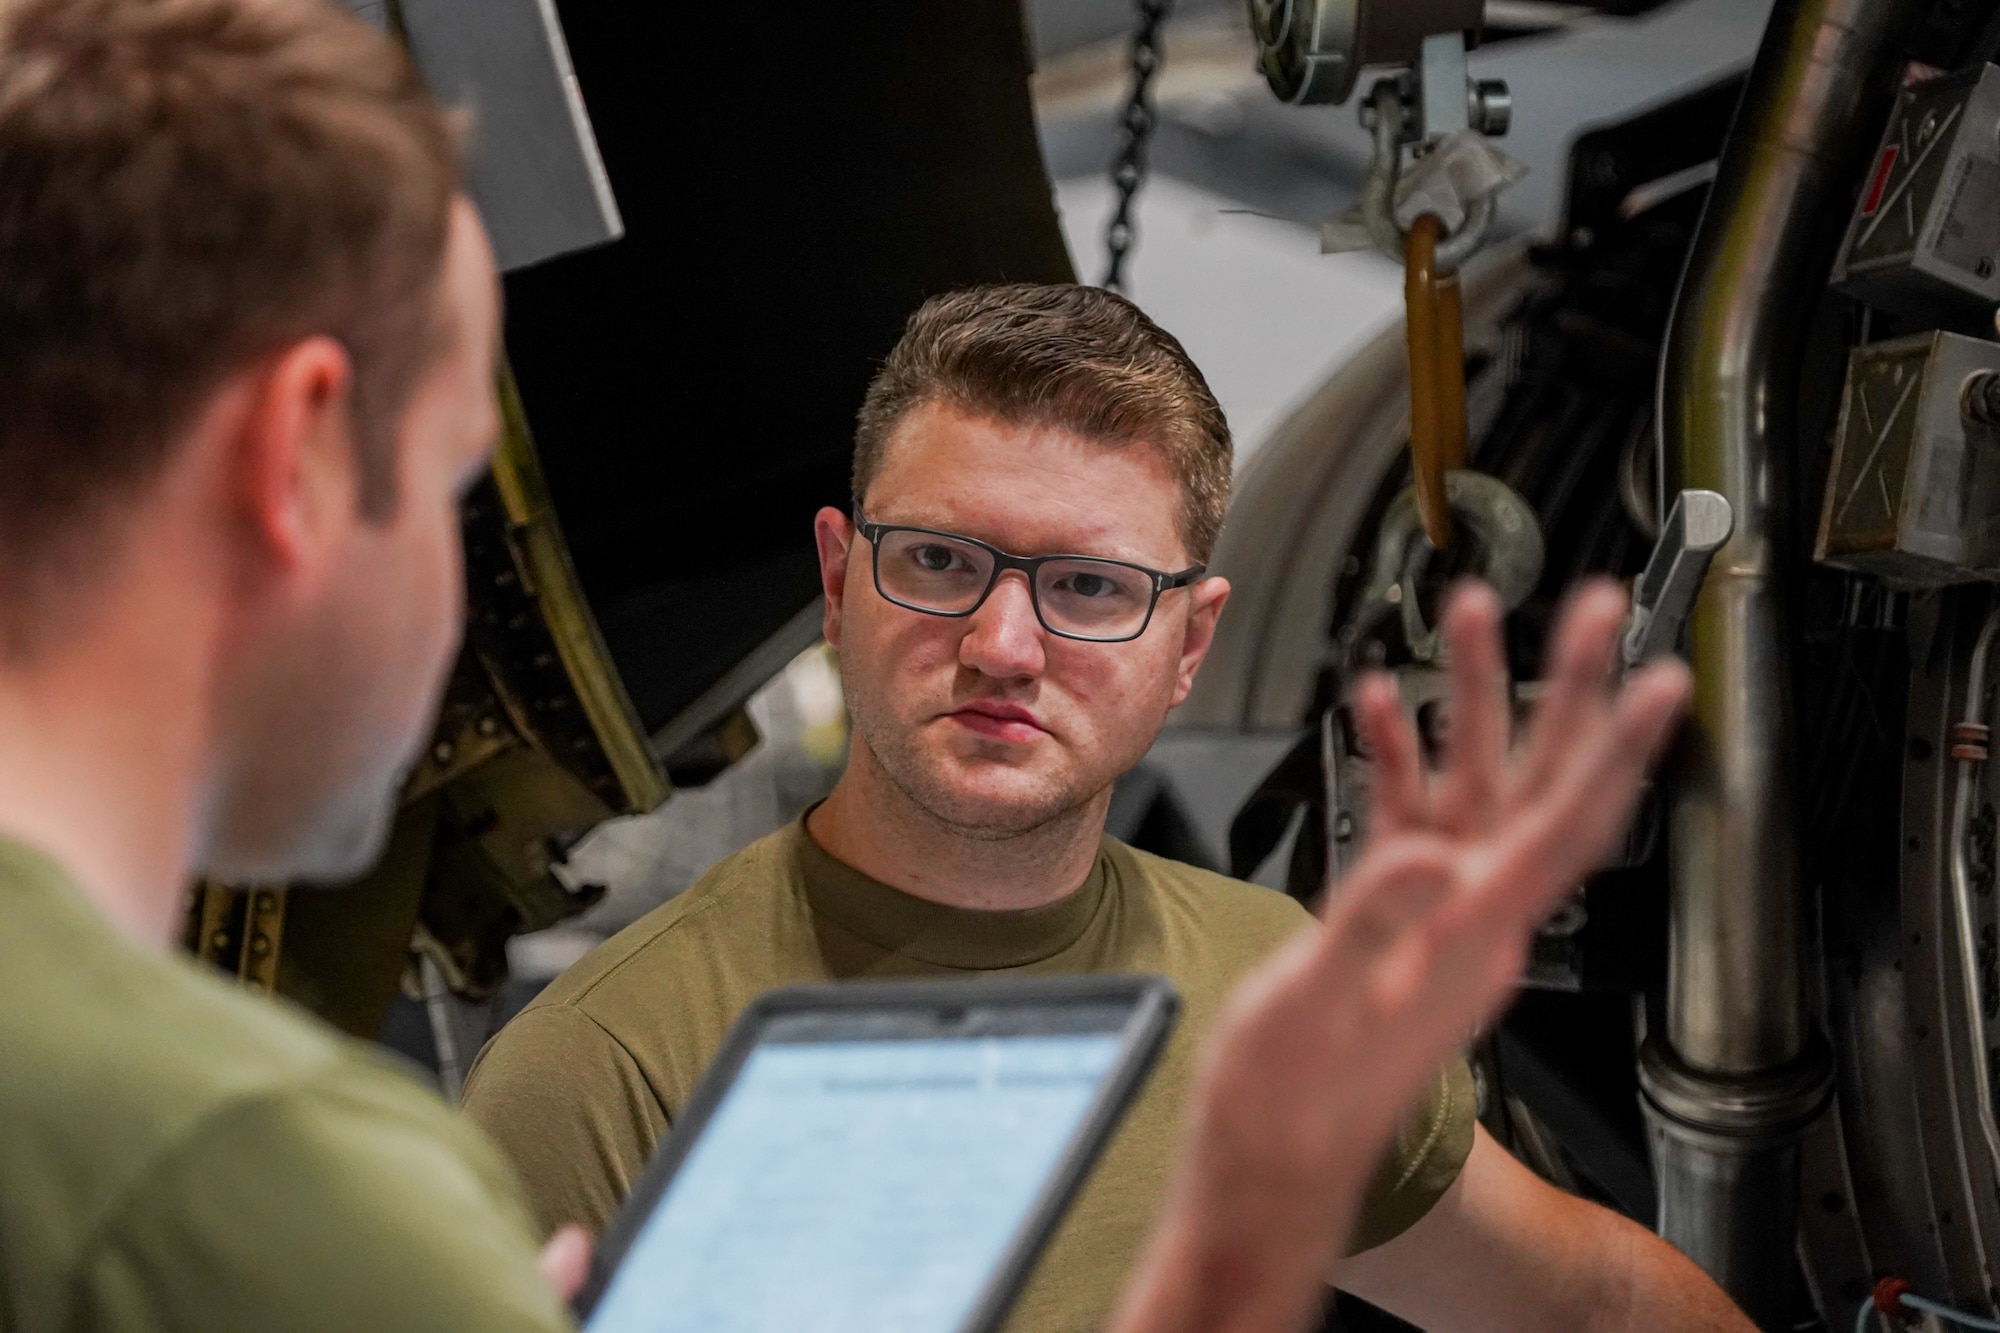 Staff Sgt. Casey Boots, an aerospace propulsion specialist from the 914th Aircraft Maintenance Squadron at Niagara Falls Air Reserve Station, New York, carefully listens to a briefing from Tech. Sgt. Alexander Brown, also an aerospace propulsion specialist from the same unit, before lifting a KC-135 Stratotanker engine into place on Oct. 18, 2022. The engine is undergoing careful maintenance following a bird strike. (U.S. Air Force photo by 1st Lt. Lucas Morrow)